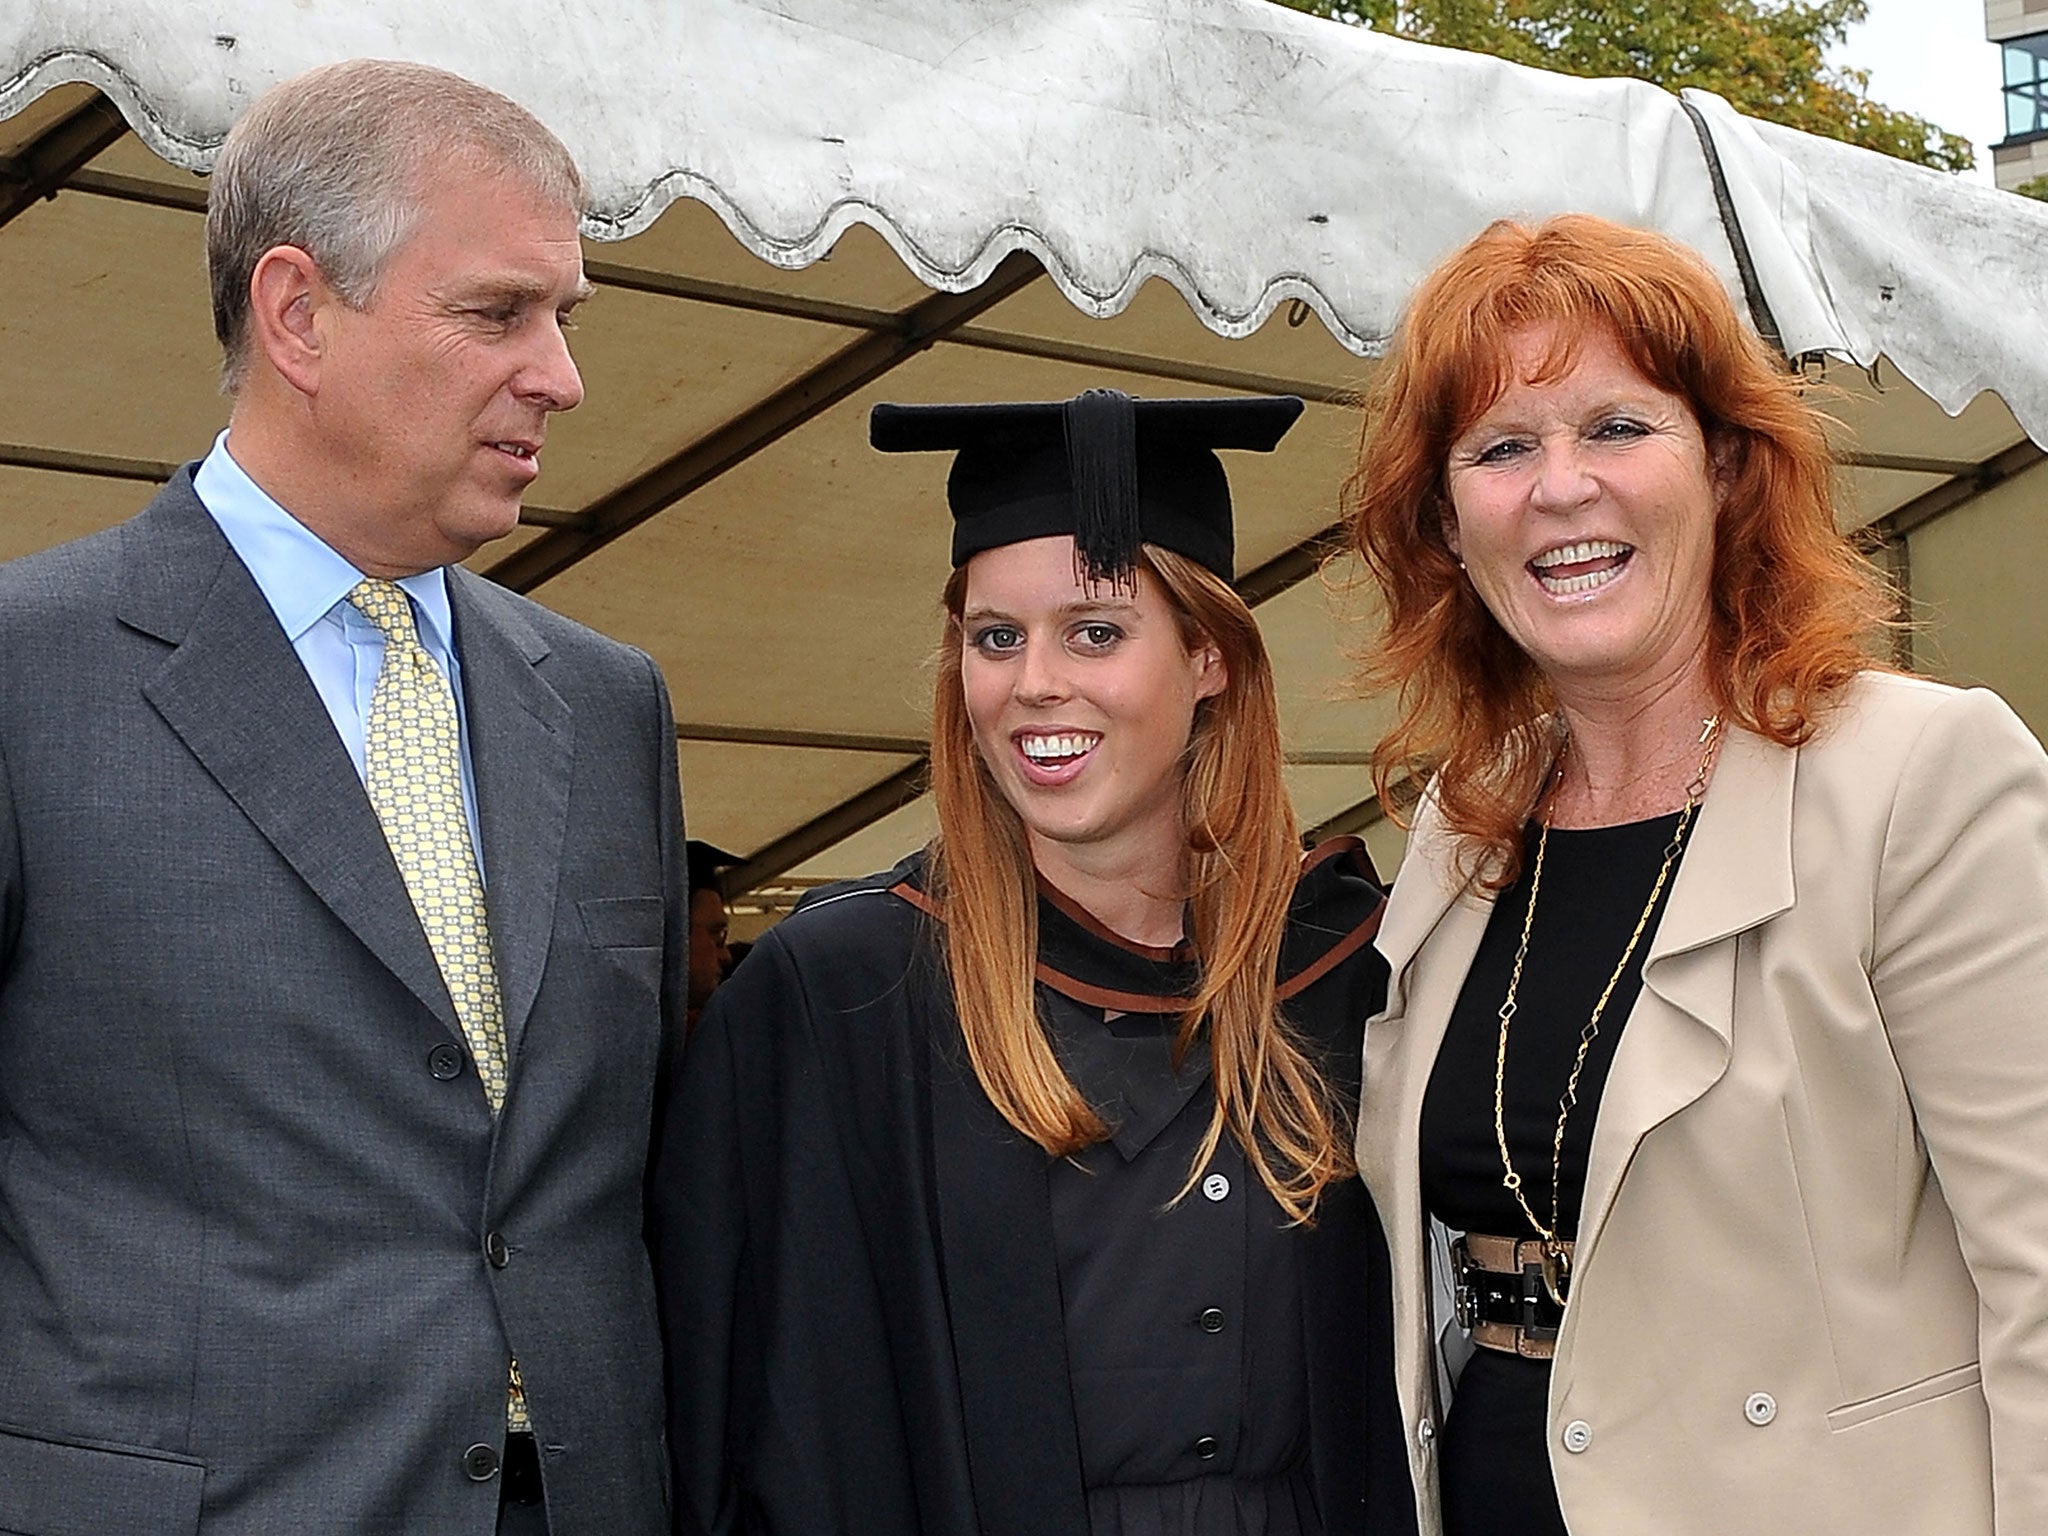 Princess Beatrice (C) poses for photograph with her parents, Britain's Prince Andrew, the Duke York (L) and Sarah Ferguson following her graduation ceremony at Goldsmiths College, in London